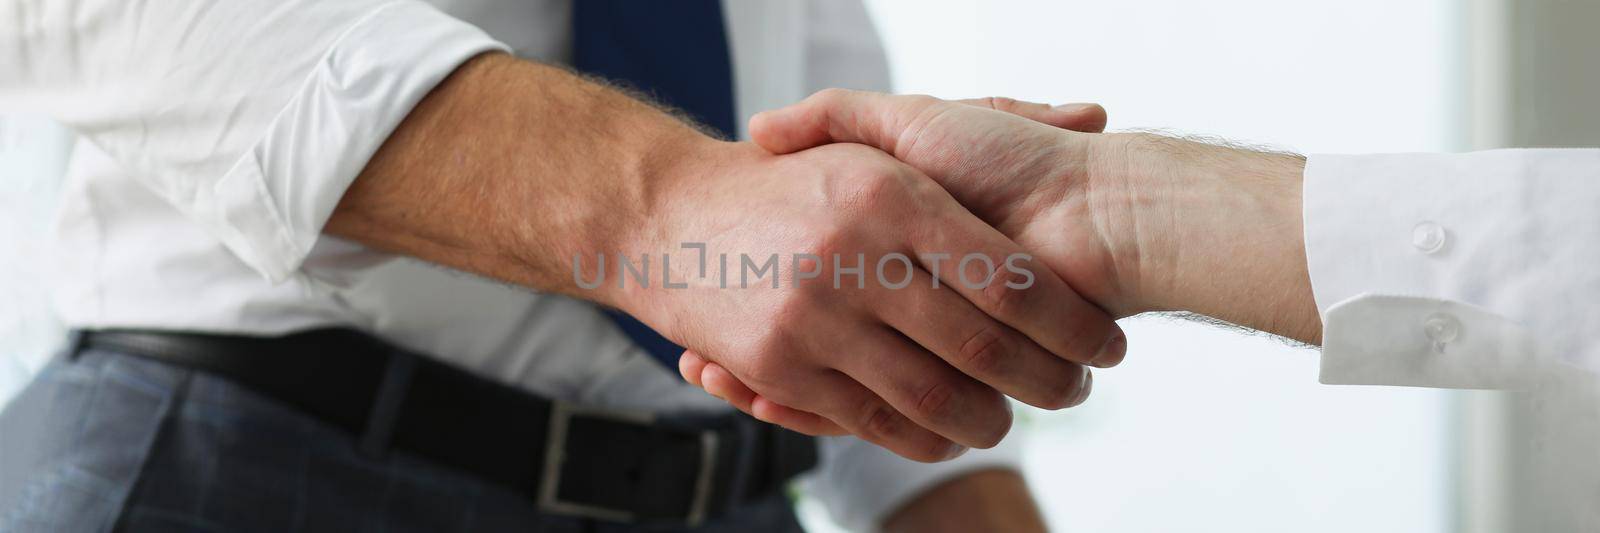 Close-up of partners shake hands over business clipboard in office. Biz partners perform friendly gesture after successful agreement. Agreement concept